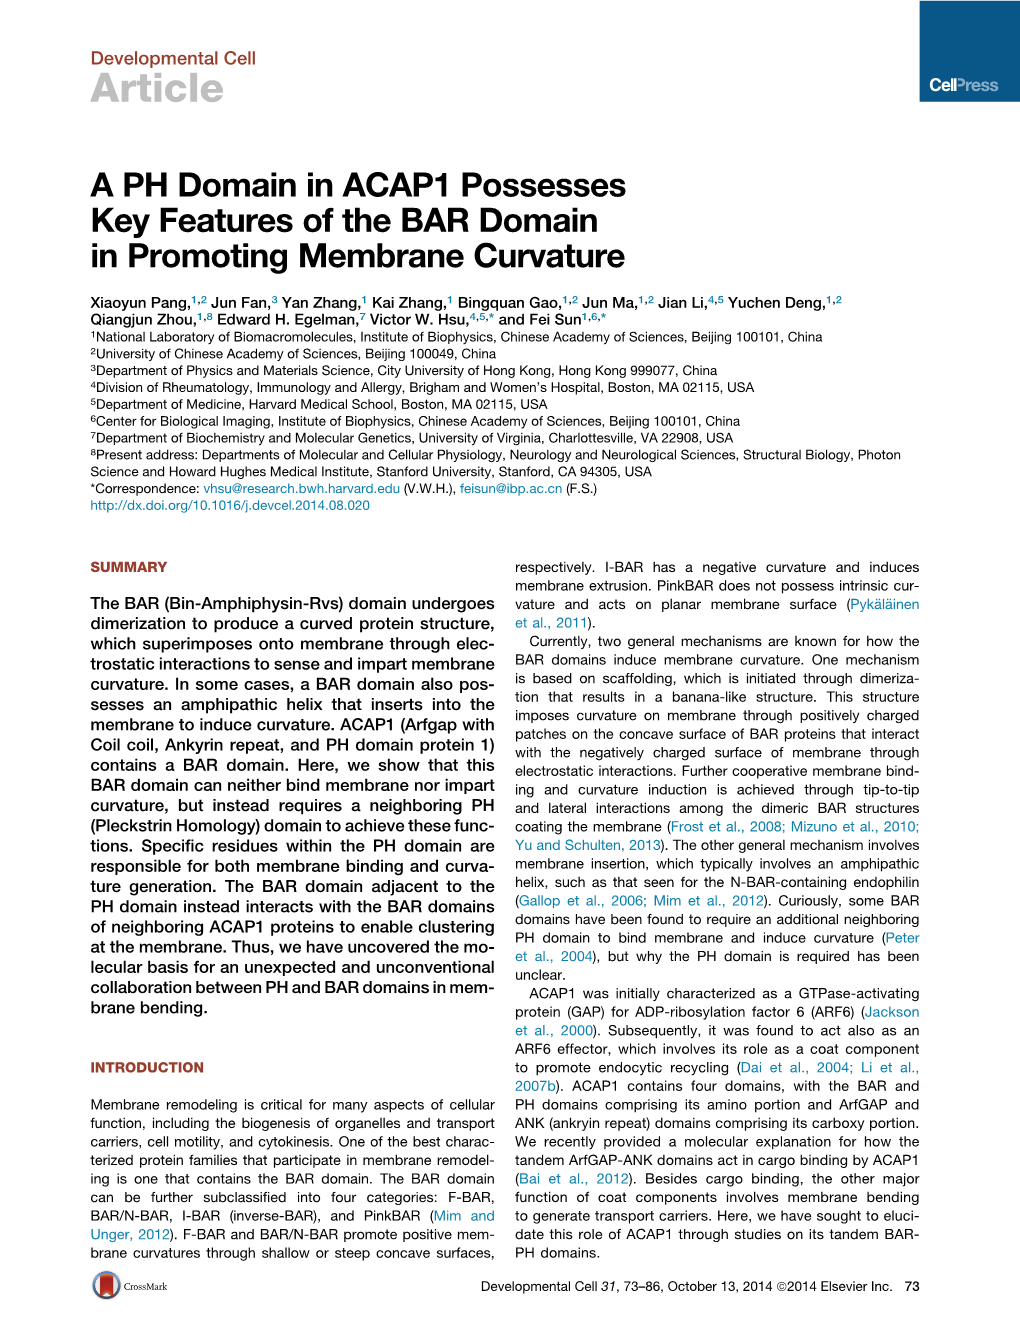 A PH Domain in ACAP1 Possesses Key Features of the BAR Domain in Promoting Membrane Curvature